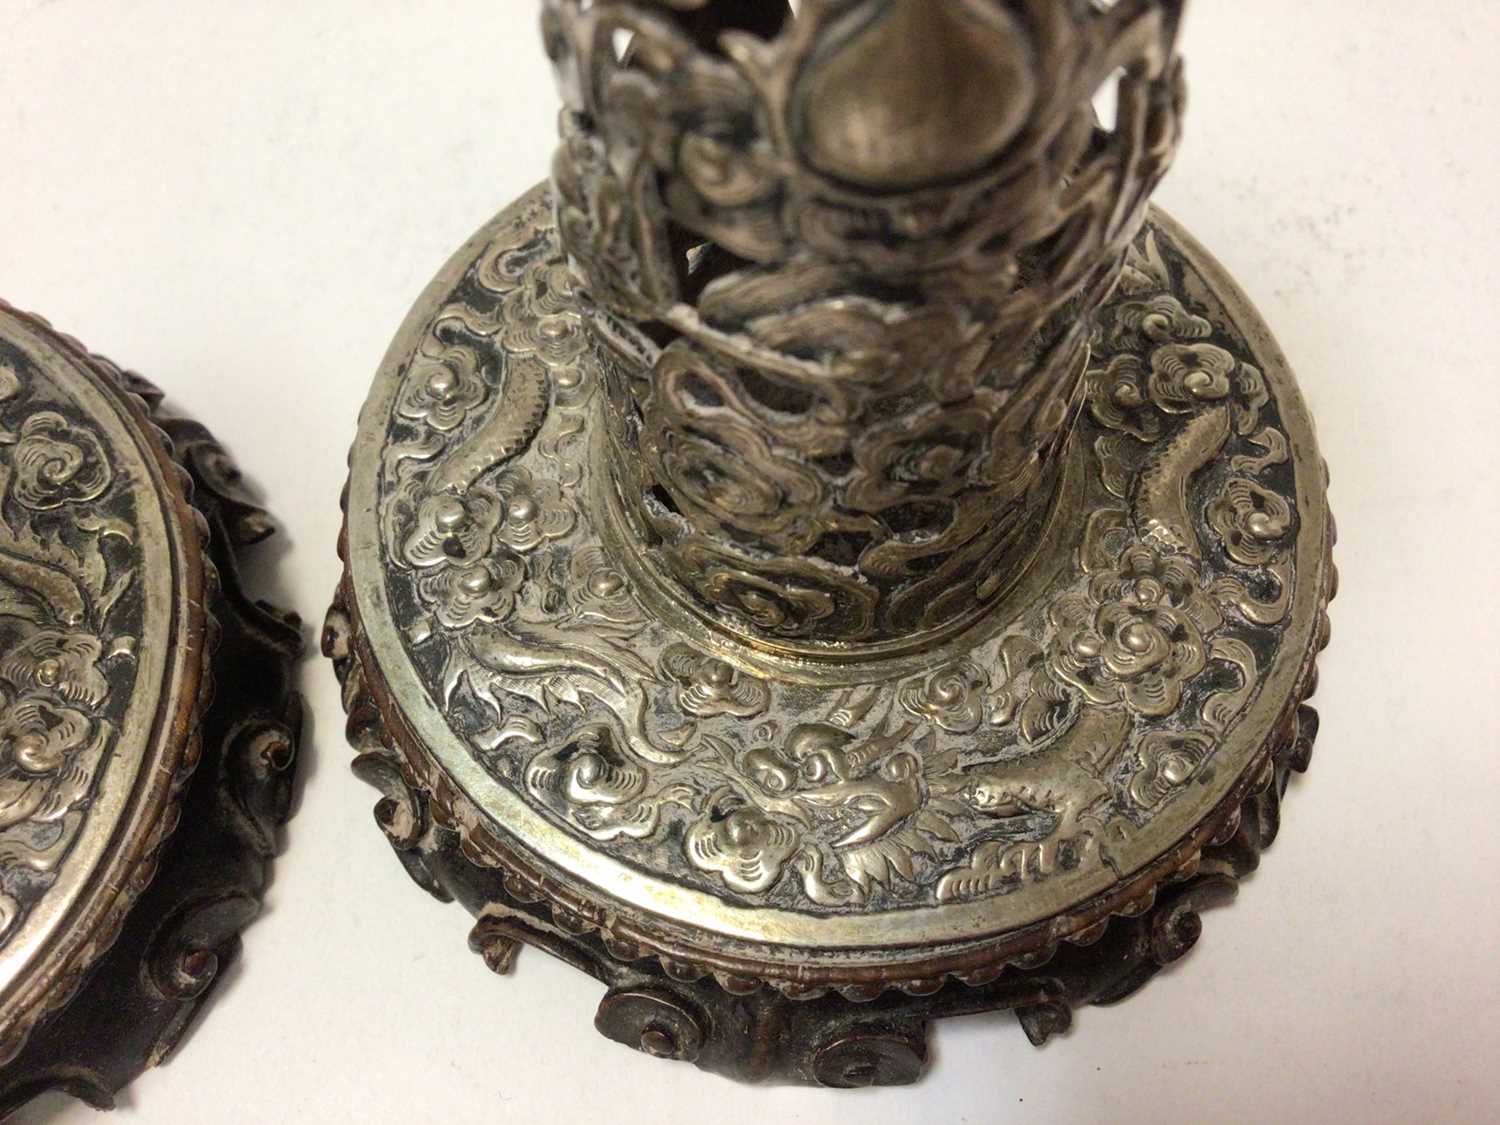 Pair of Chinese white metal candlesticks with pierced dragon decoration on carved wood bases - Image 6 of 6